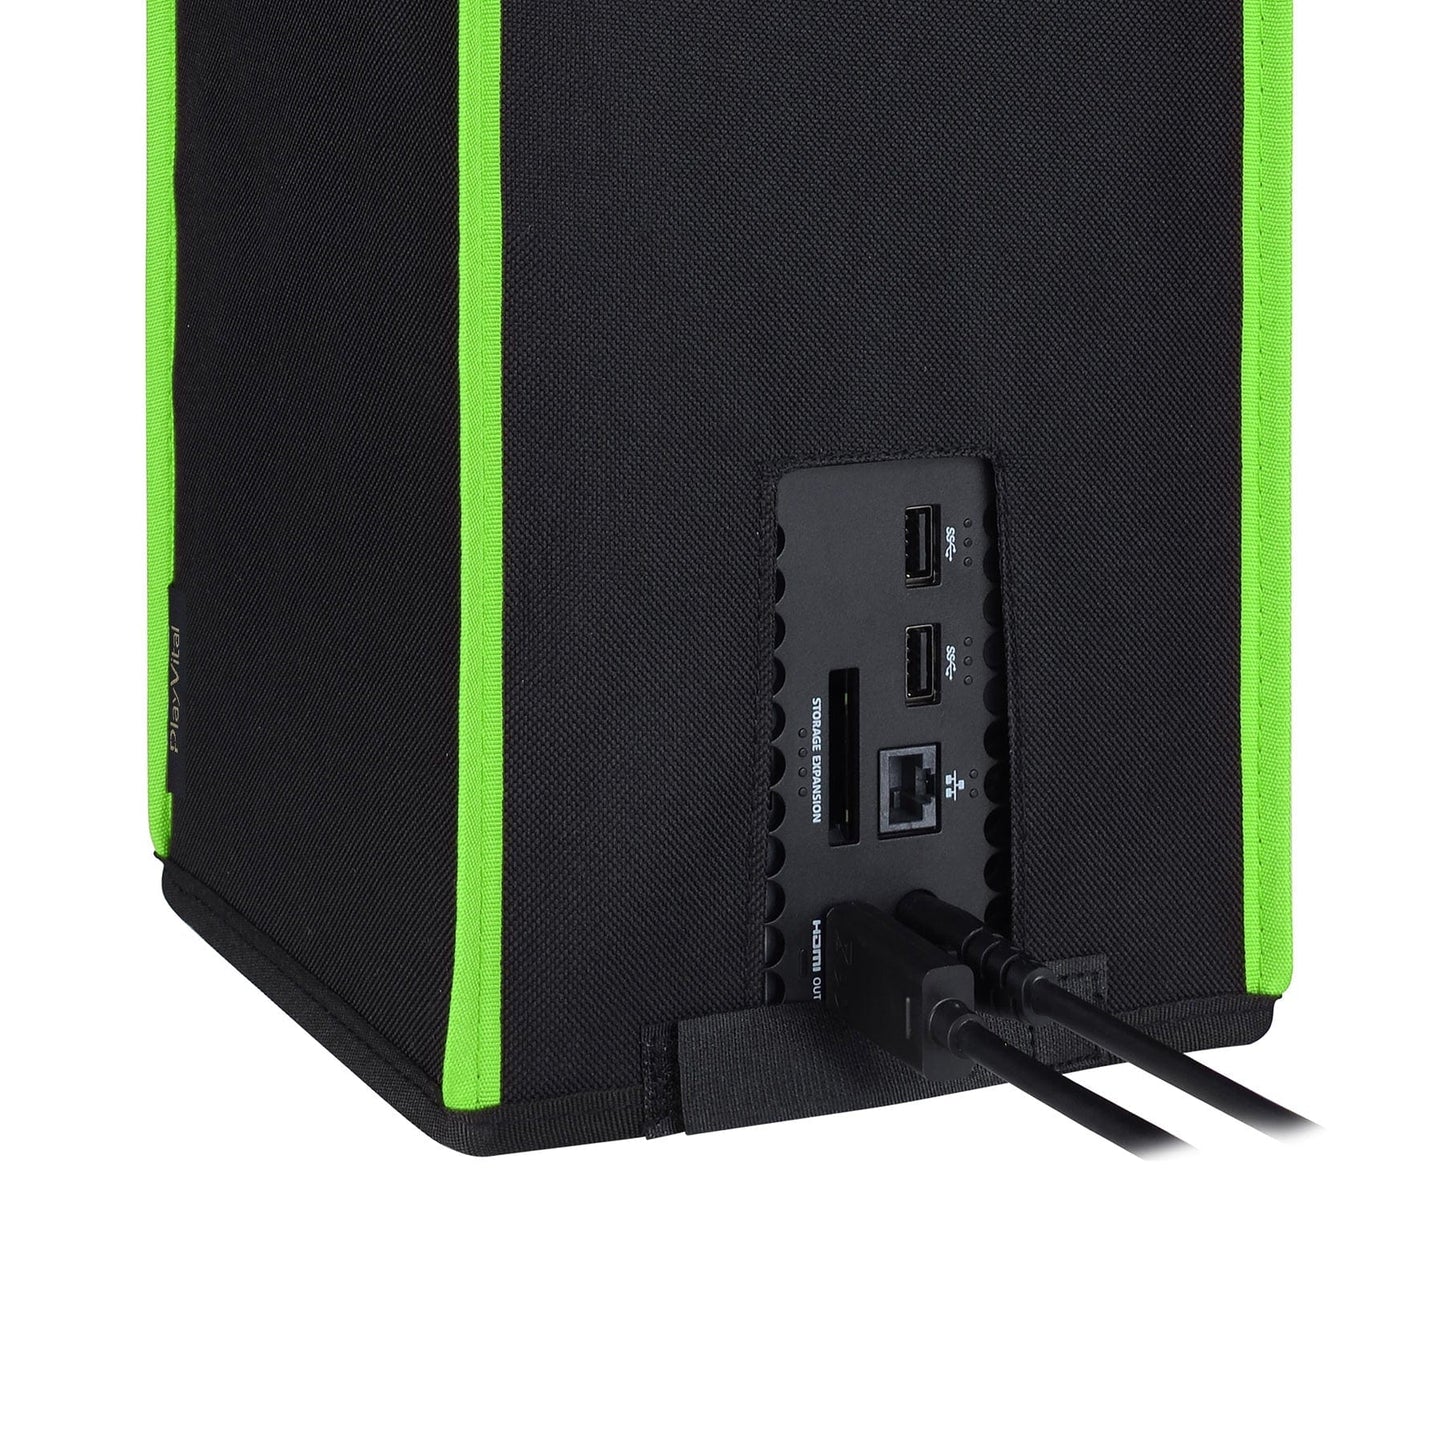 PlayVital Black & Neon Green Trim Nylon Dust Cover for Xbox Series X Console, Soft Neat Lining Dust Guard, Anti Scratch Waterproof Cover Sleeve for Xbox Series X Console - X3PJ011 PlayVital